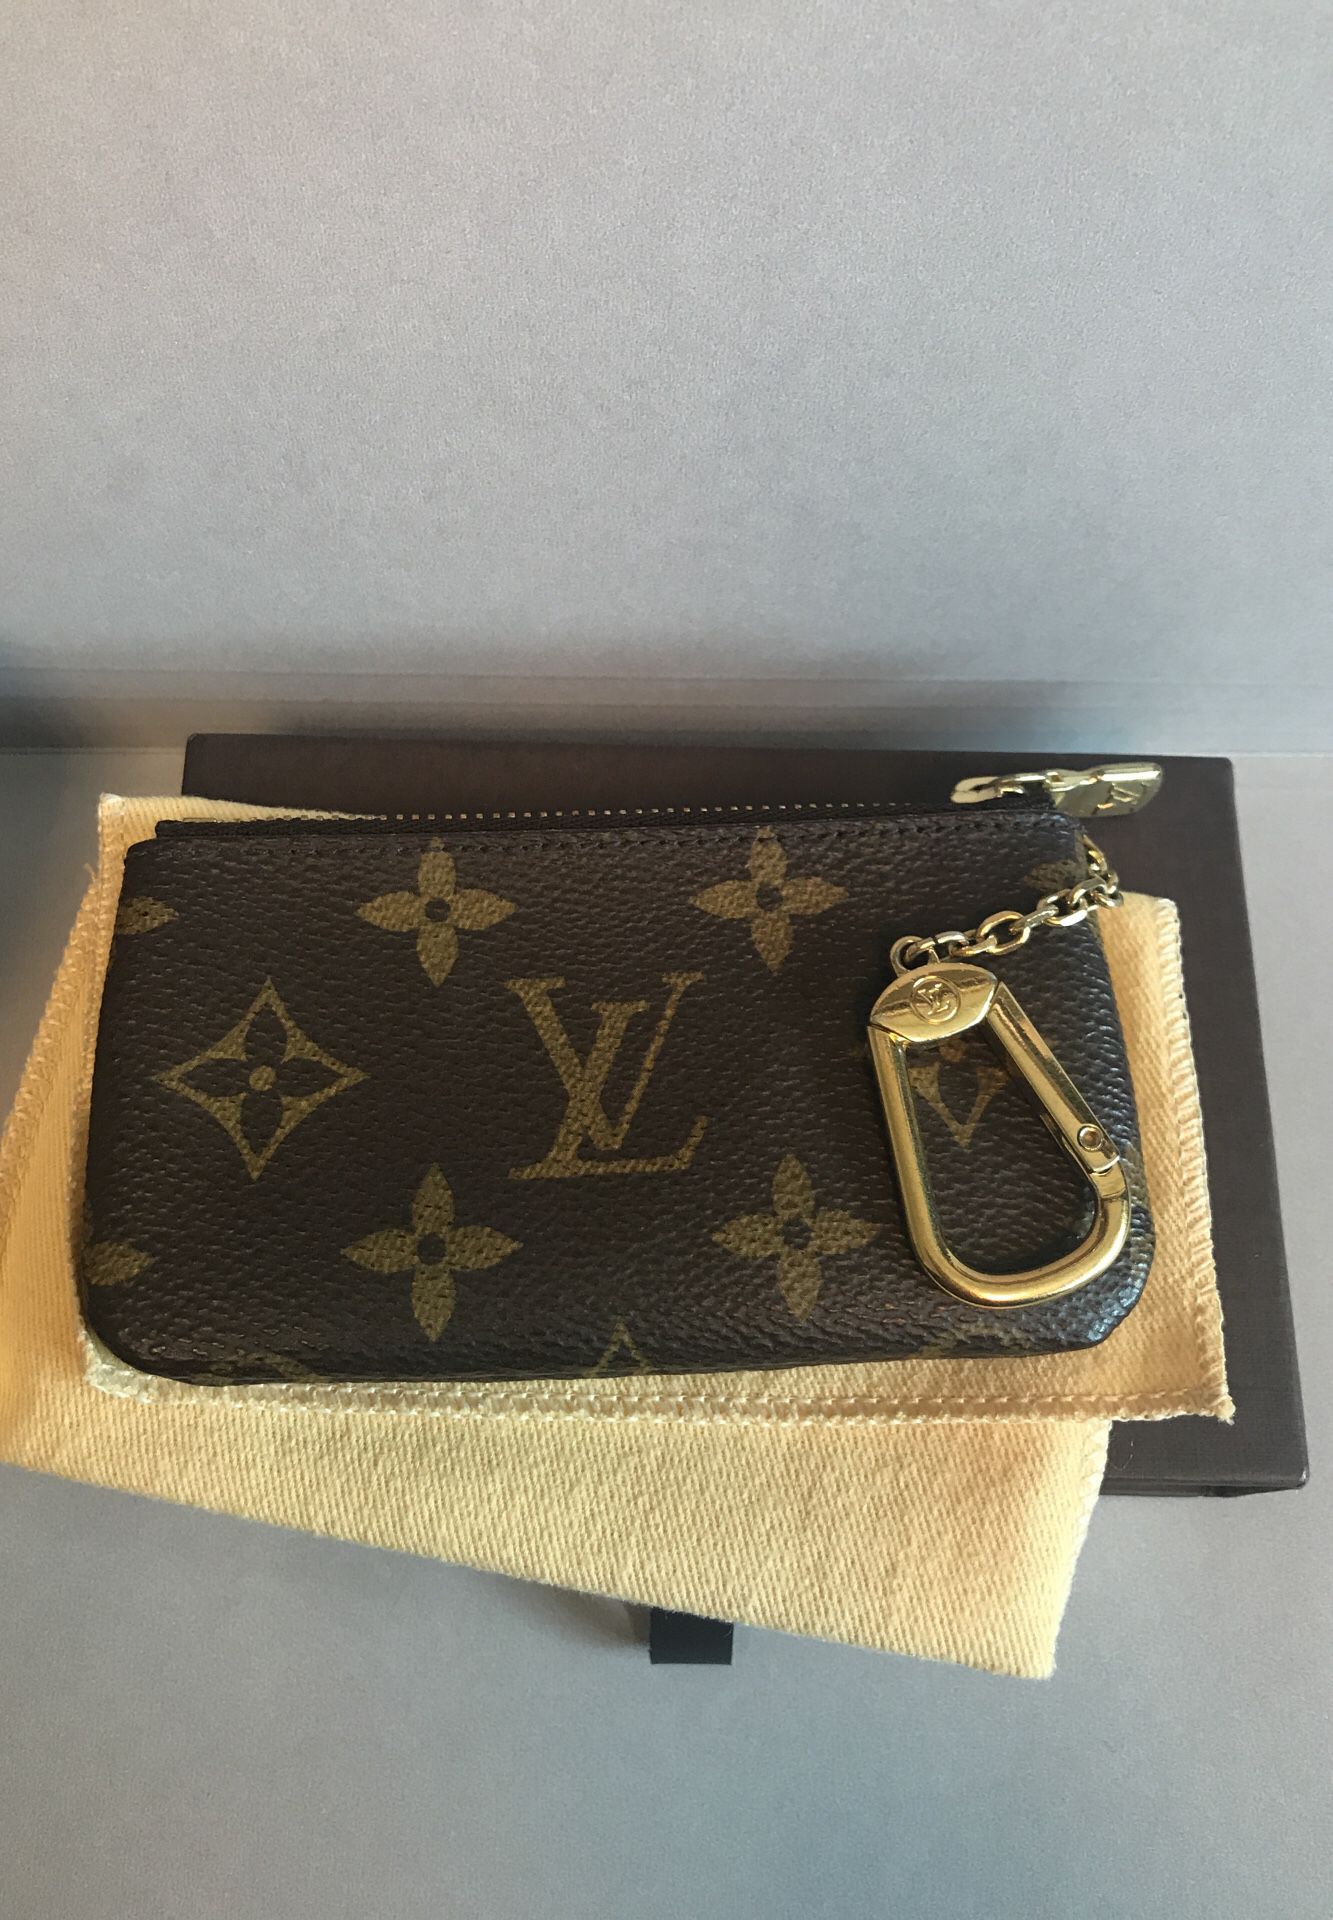 used lv key pouch